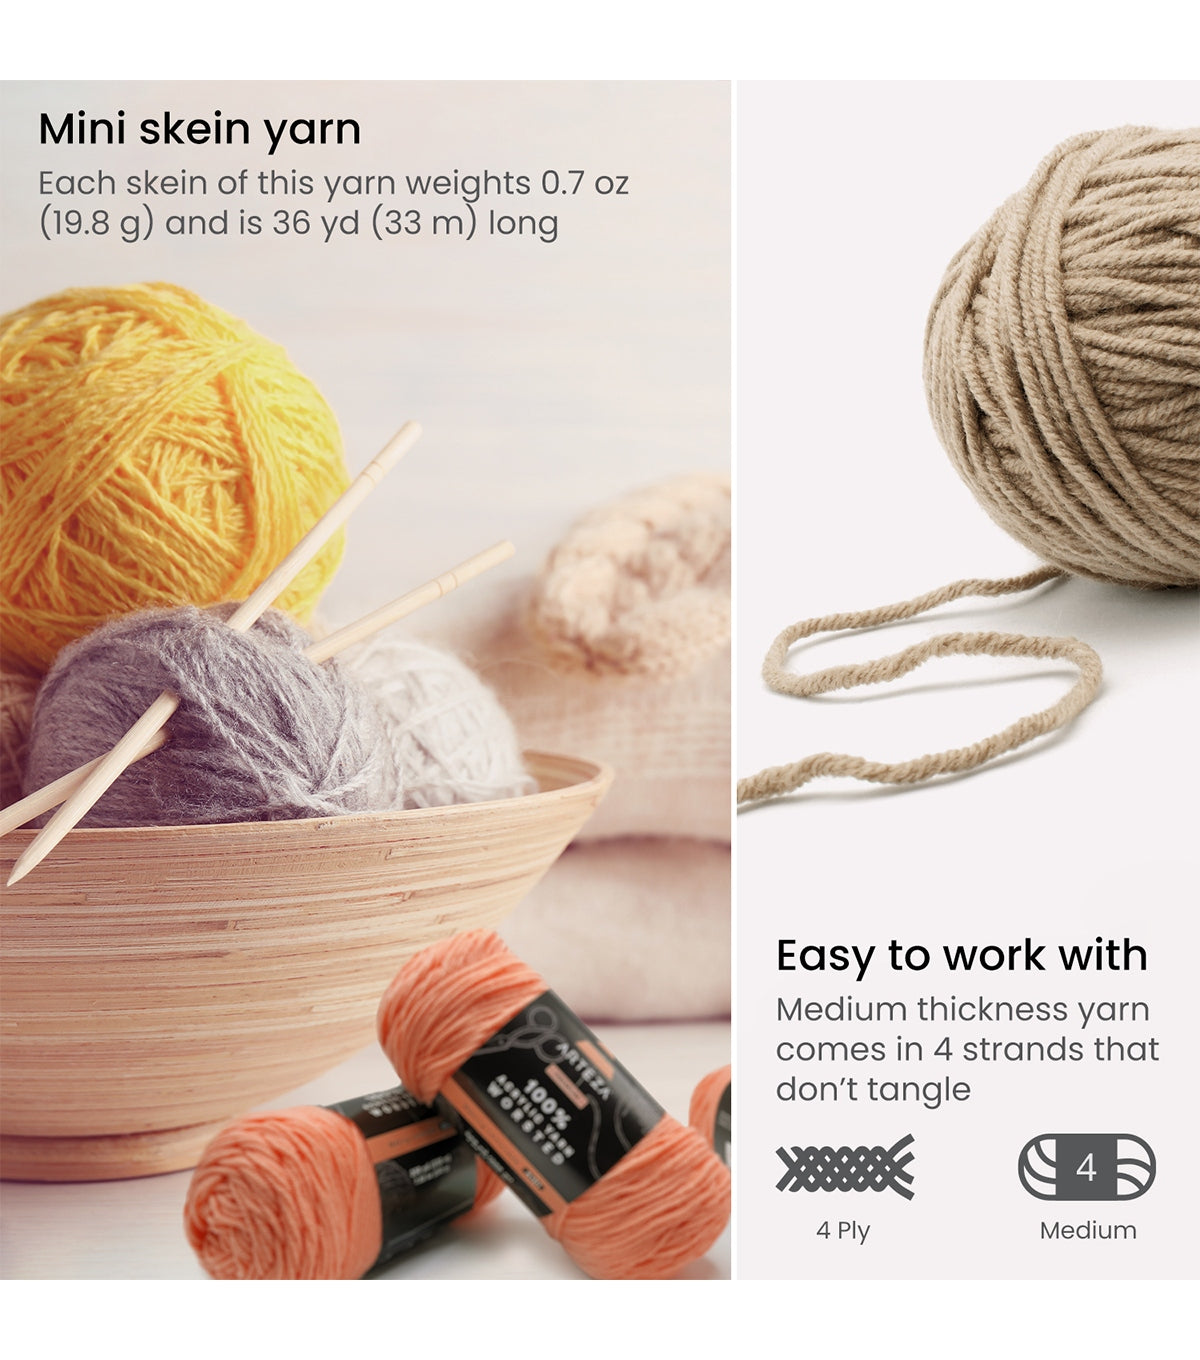 100% Acrylic Yarn, Worsted, Light Colors - Mini Pack of 20